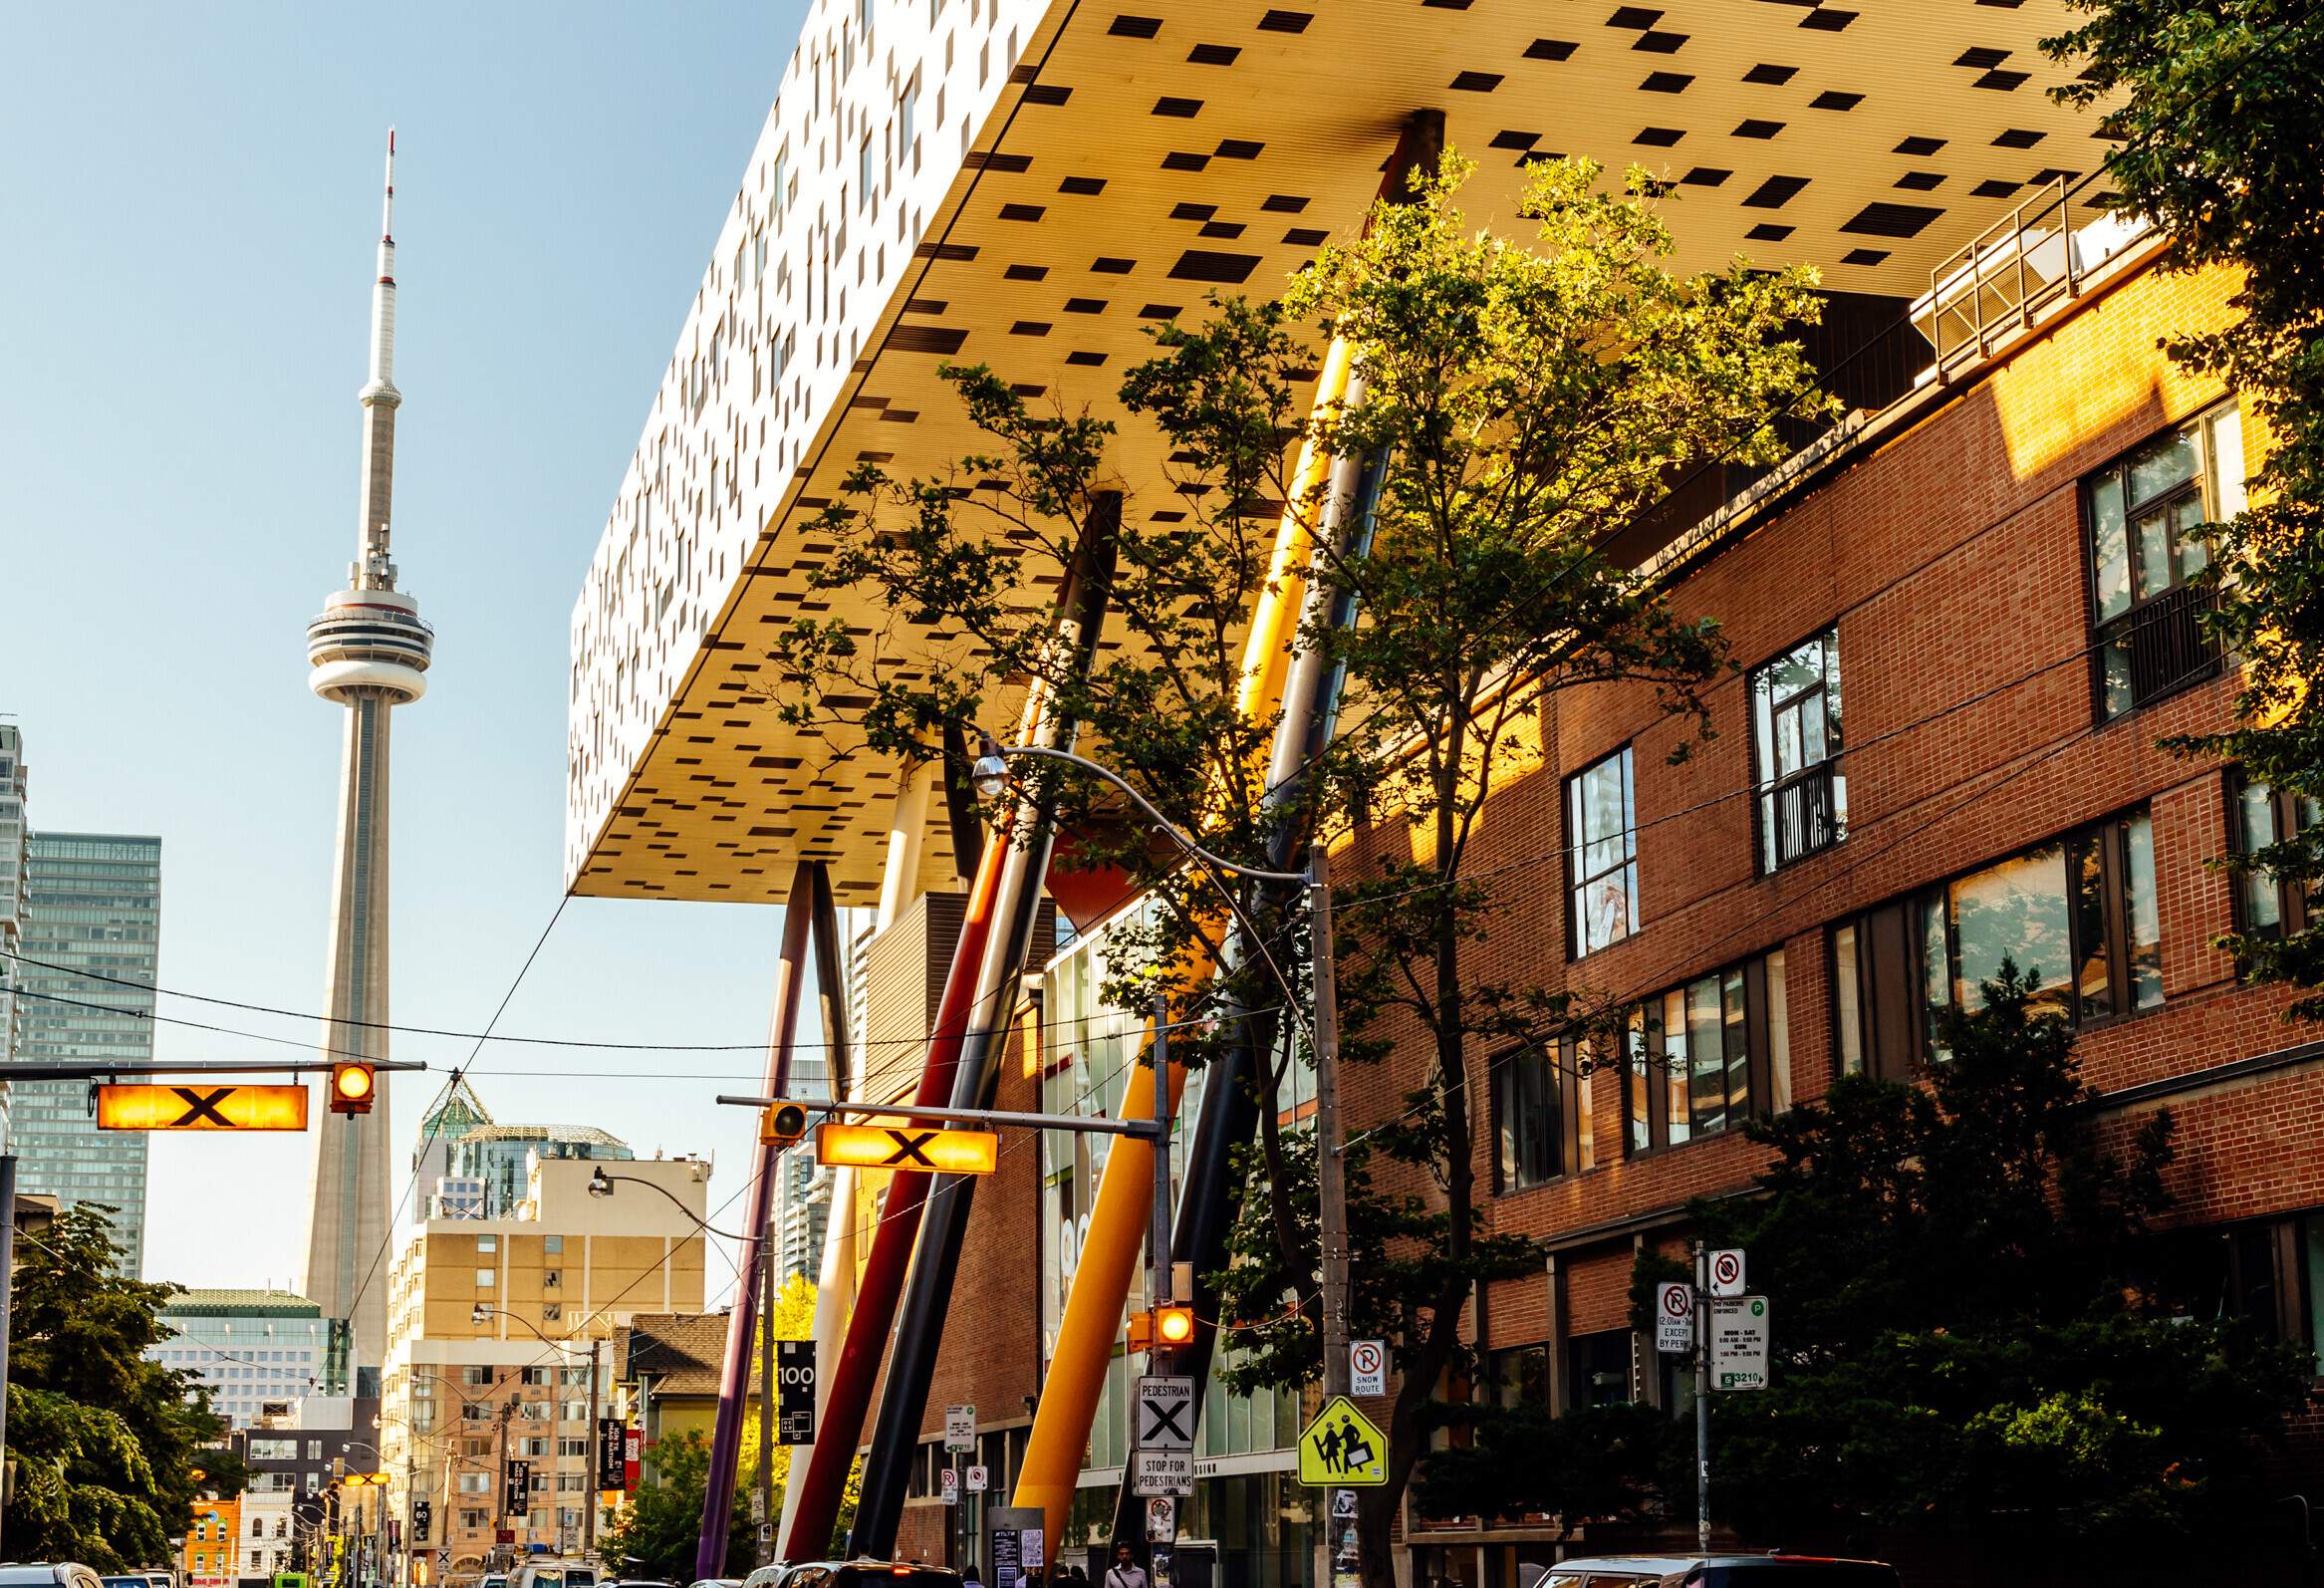 The CN Tower and the unique main building of OCAD University tower over Toronto's downtown street.